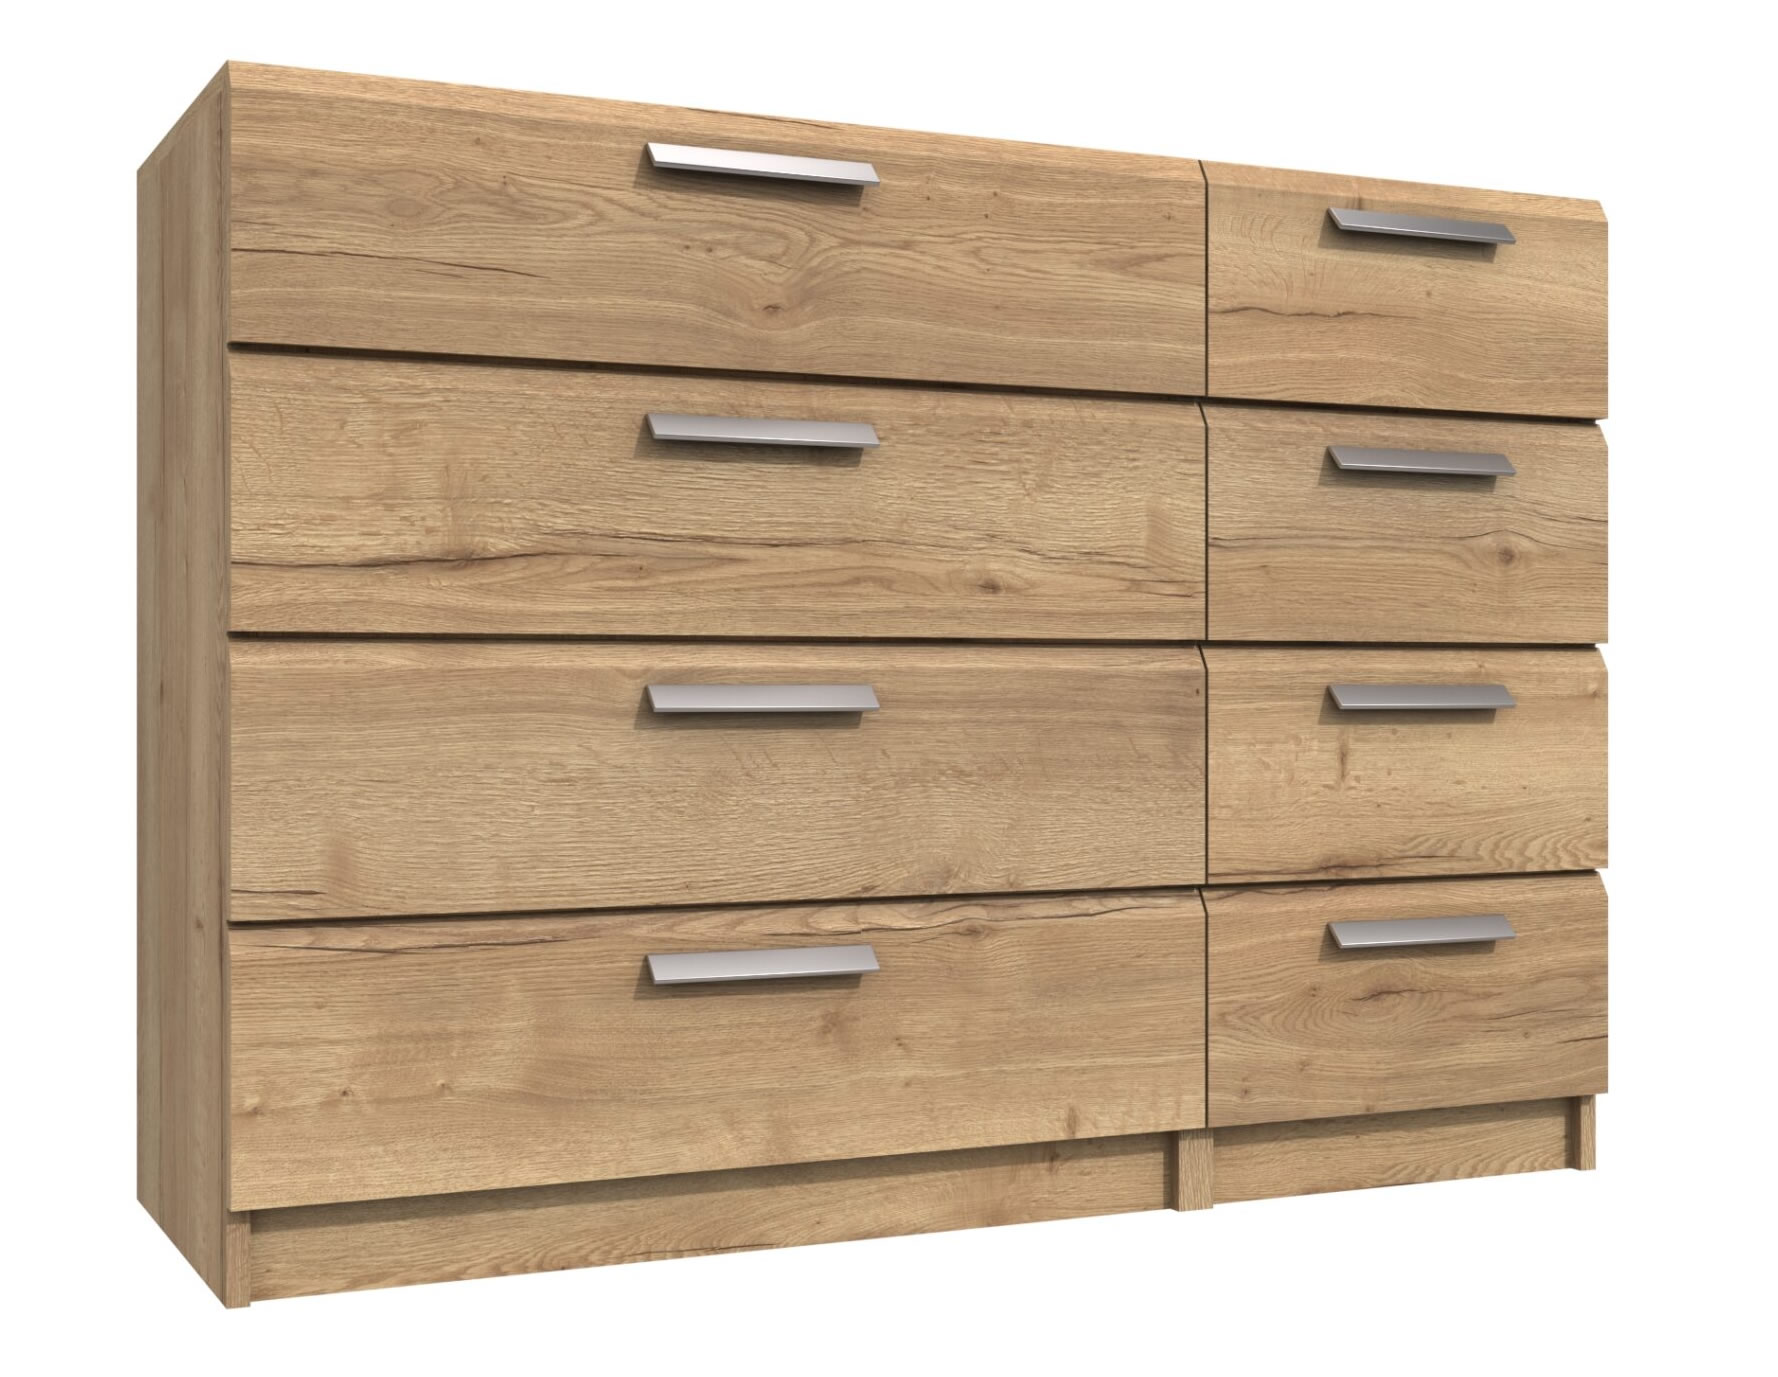 Wister Four Drawer Double Chest - Rustic Oak